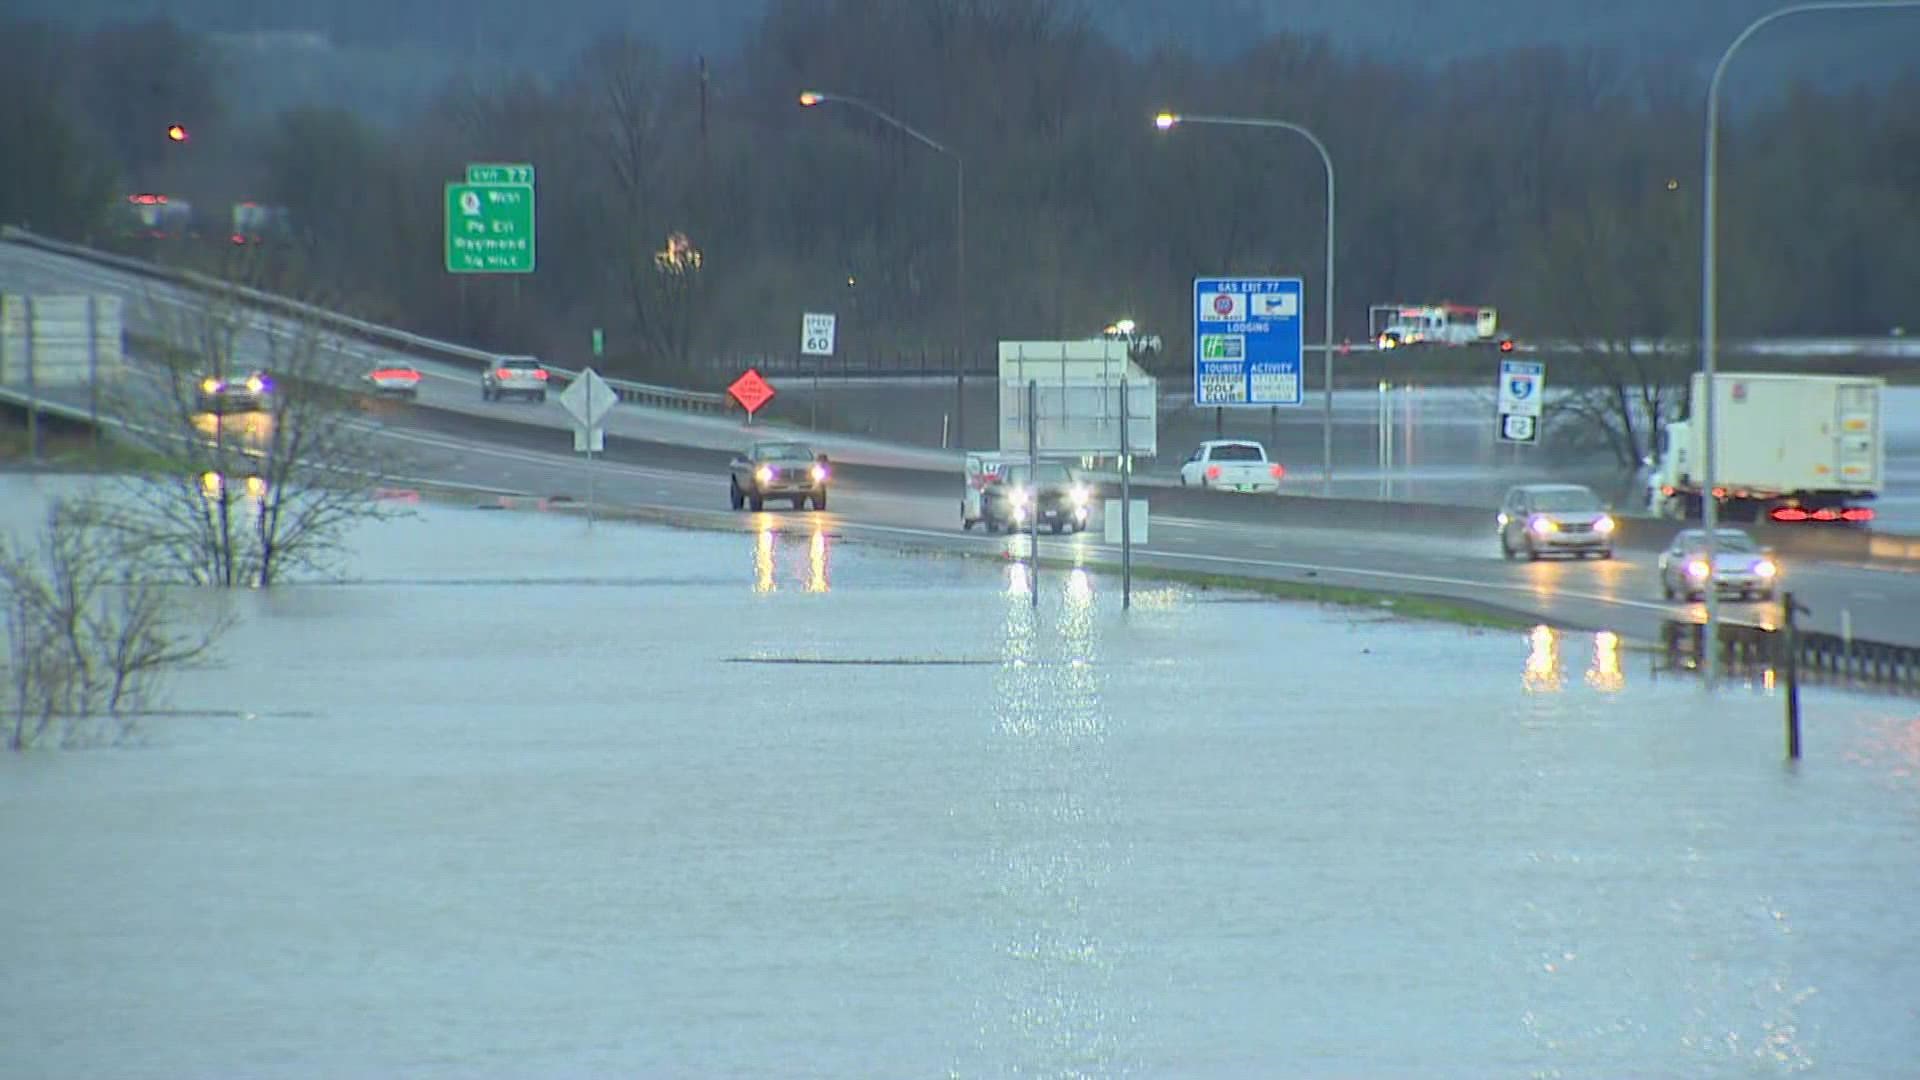 WSDOT closed a 20-mile stretch of I-5 between Grand Mound (milepost 88) and U.S. 2 south of Chehalis (milepost 68) due to the rising Chehalis River covering the road